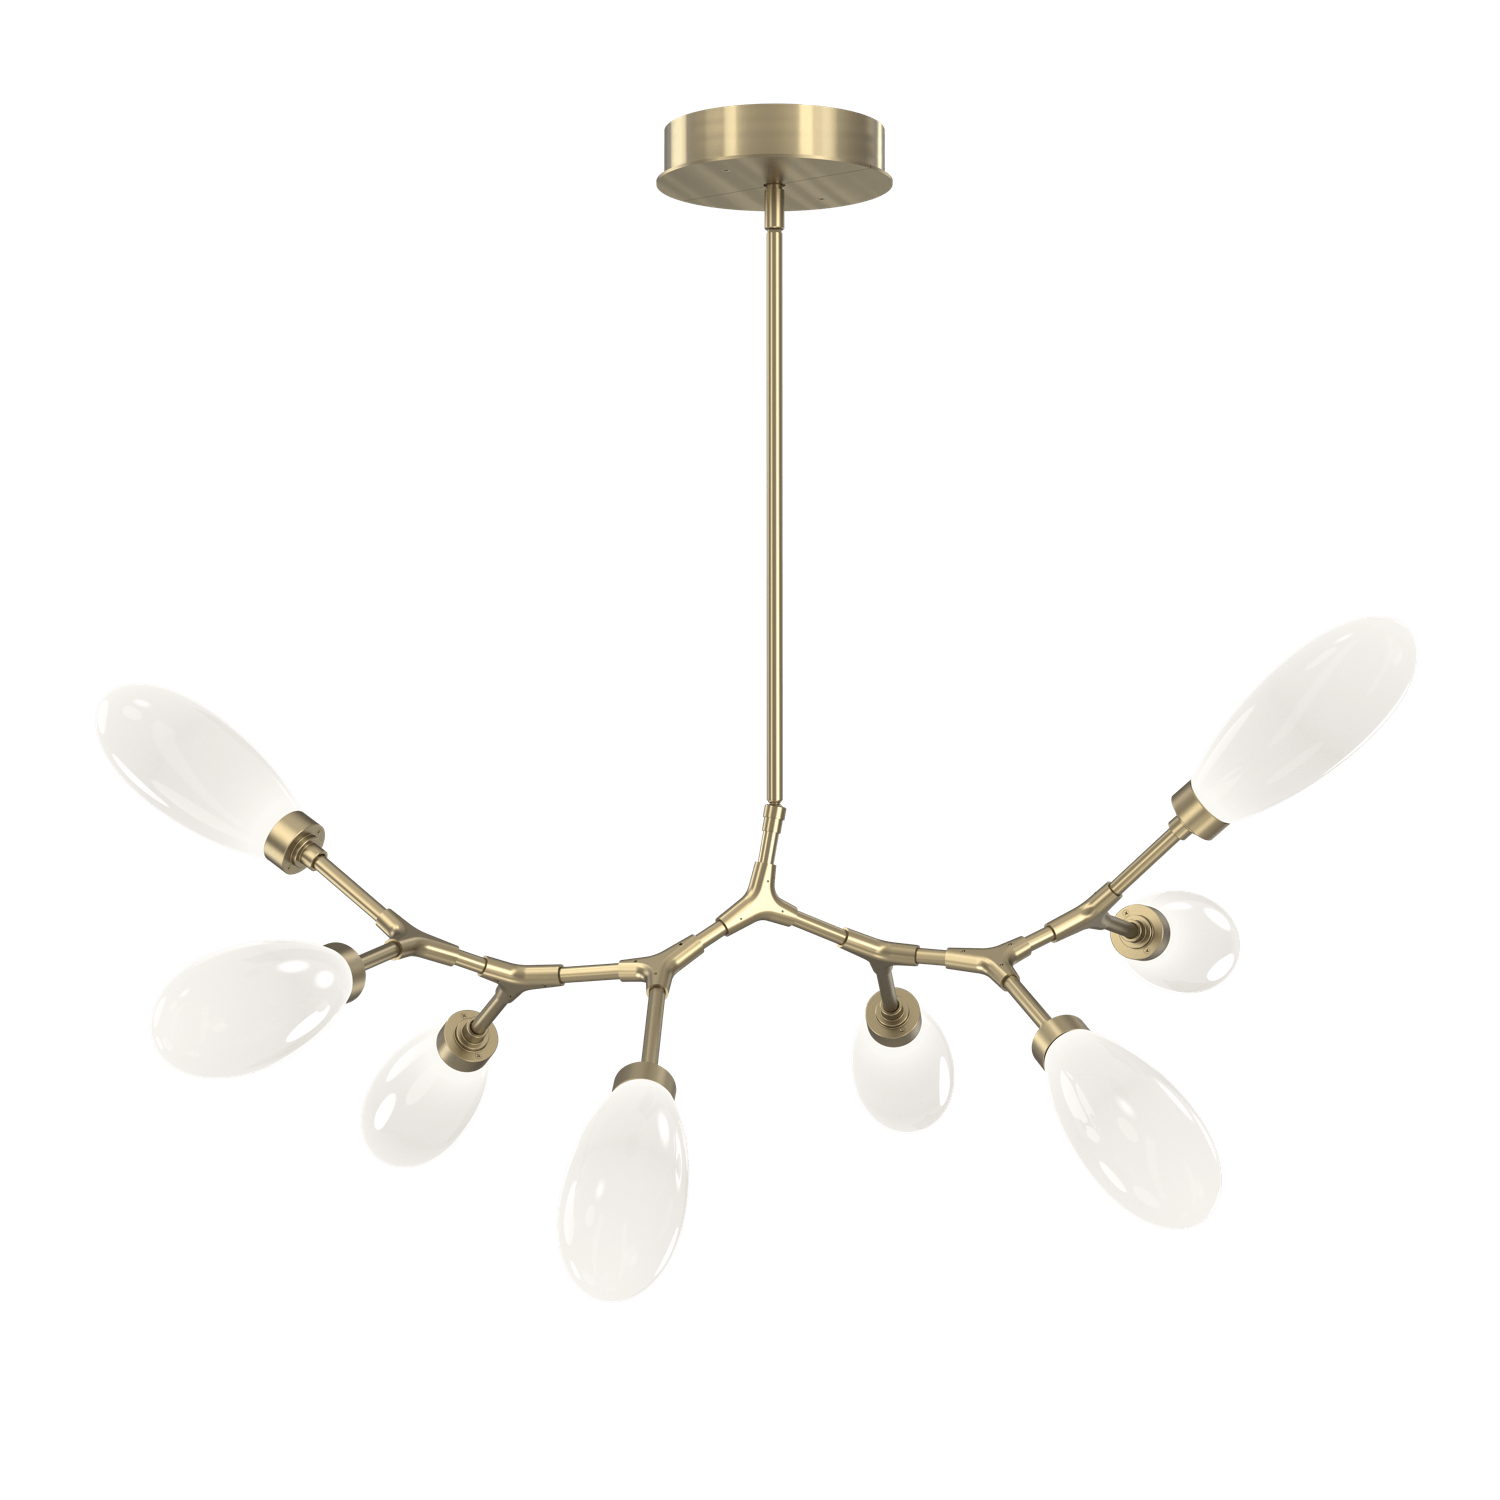 PLB0071-BB-HB-WL-LL-Hammerton-Studio-Fiori-8-light-organic-branch-chandelier-with-heritage-brass-finish-and-opal-white-glass-shades-and-LED-lamping